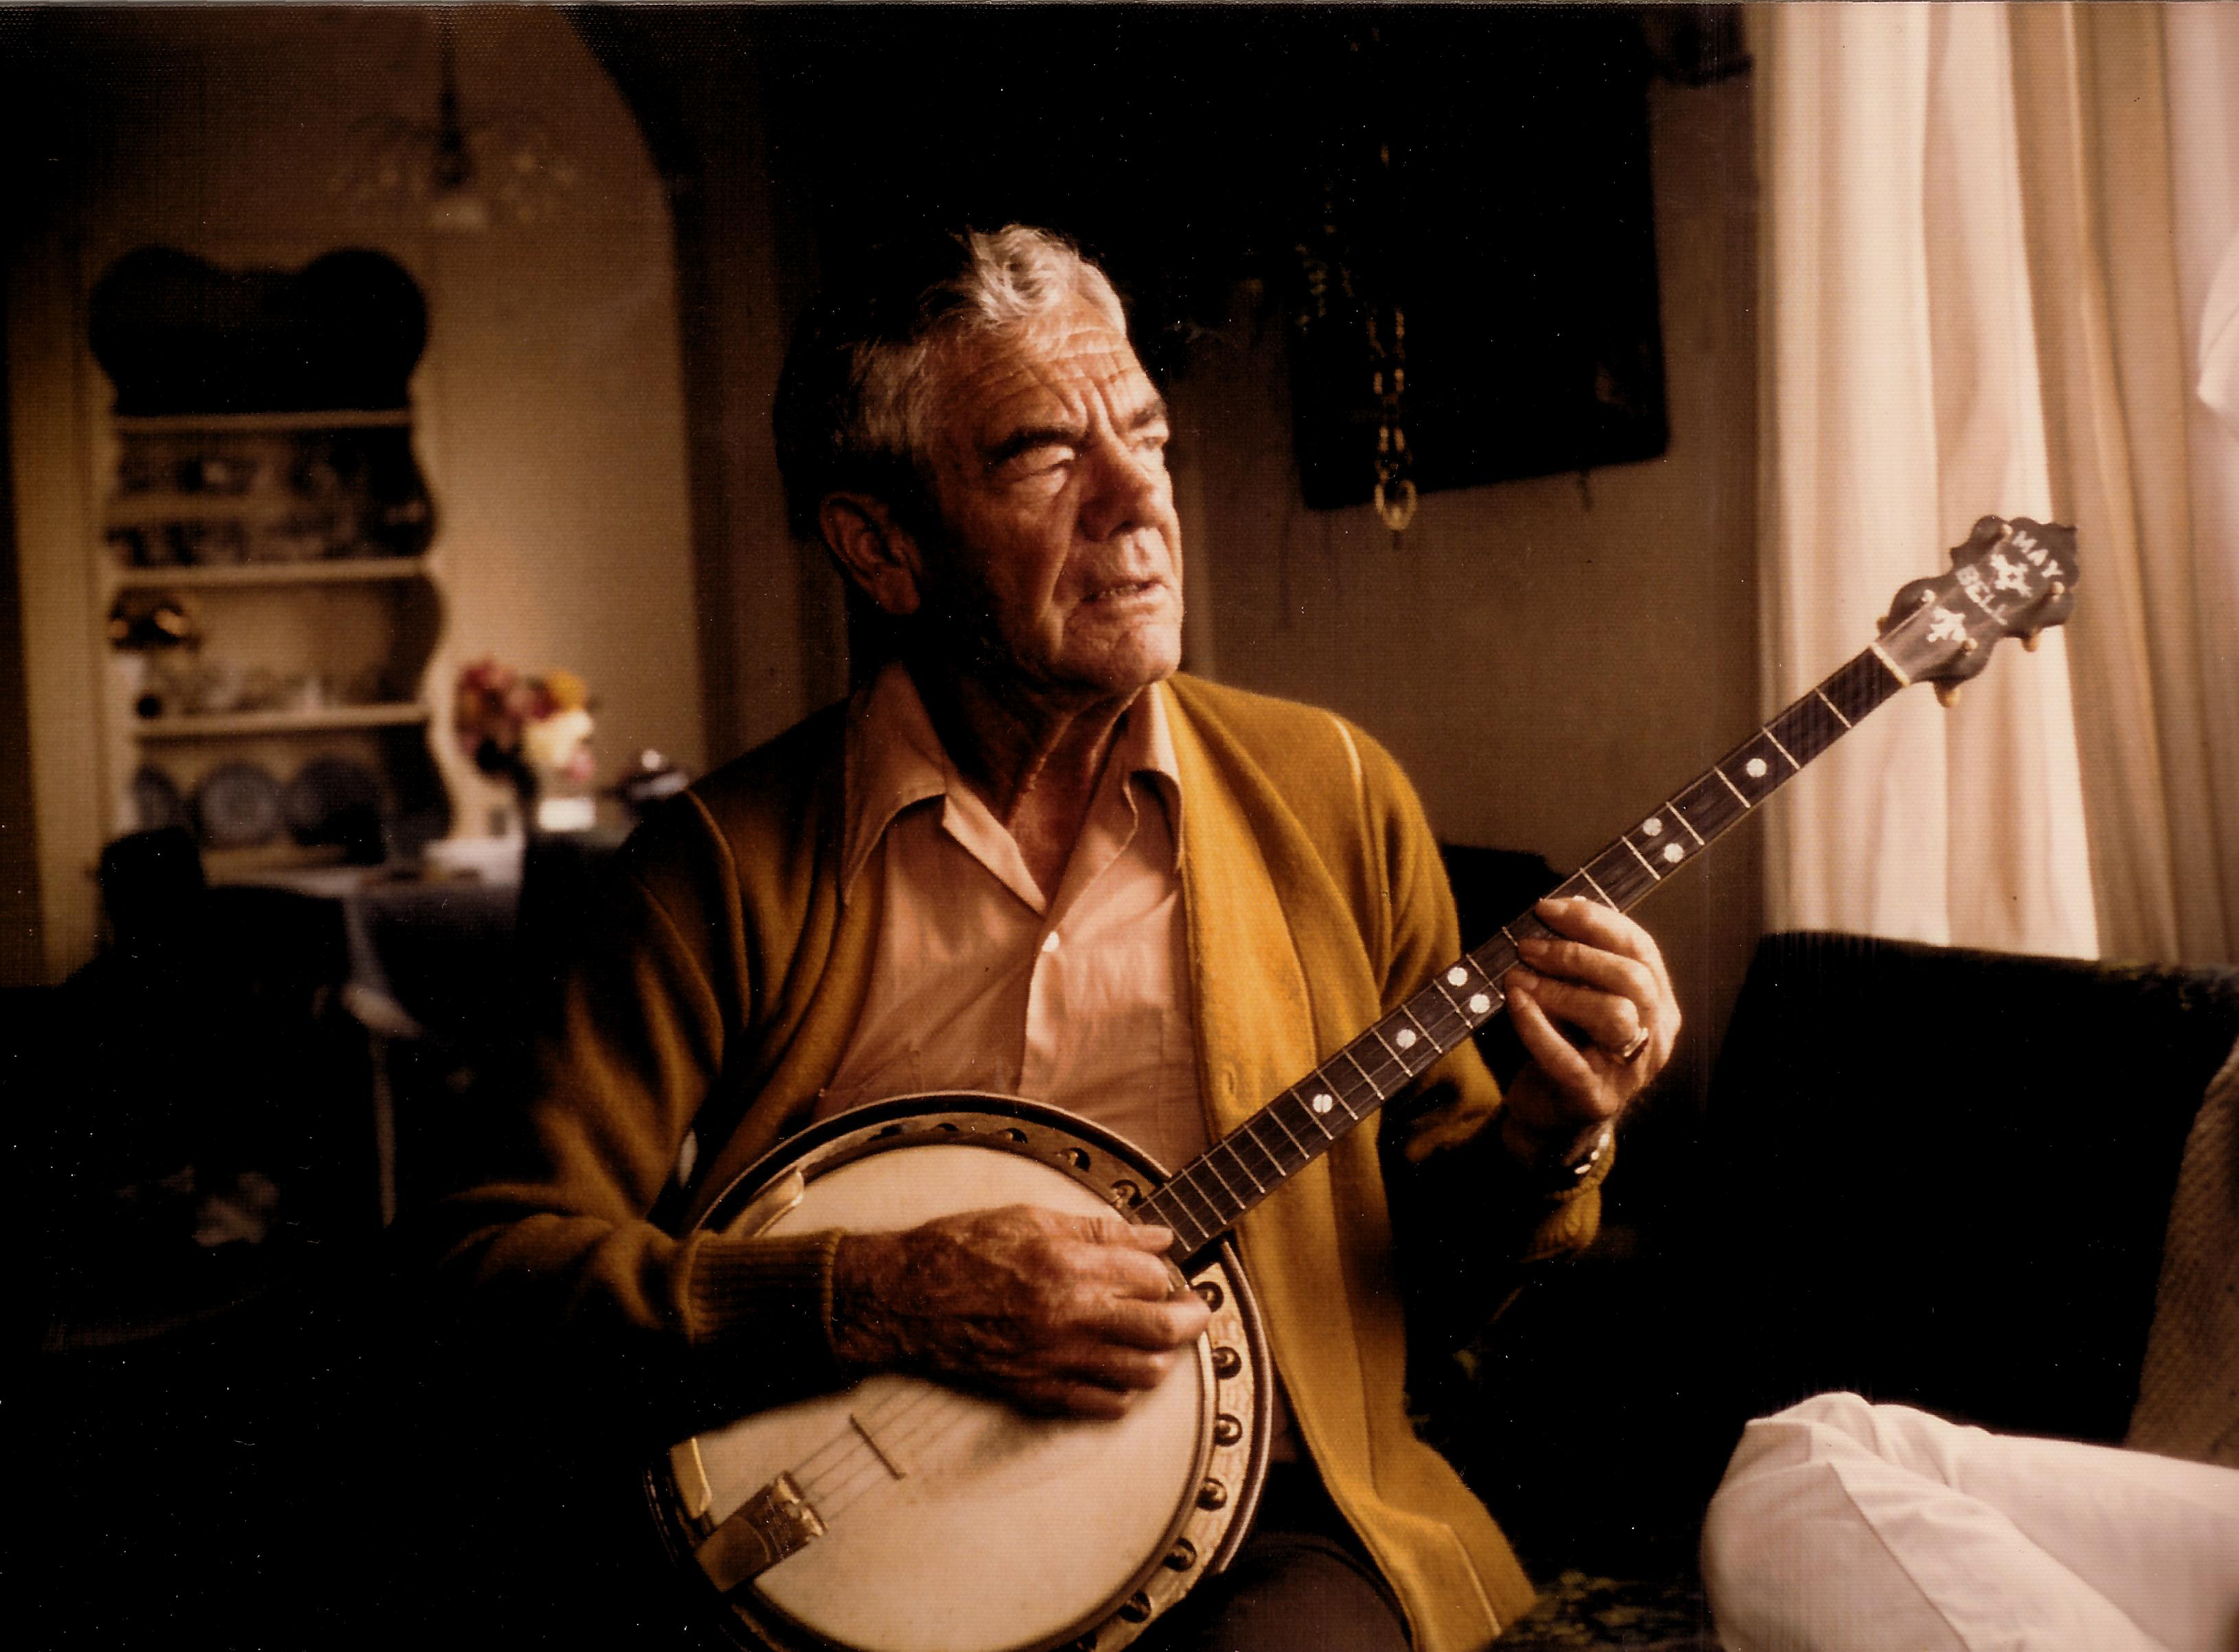 A distant uncle named Ed Wheeler, playing his banjo named LuluBelle in 1956.